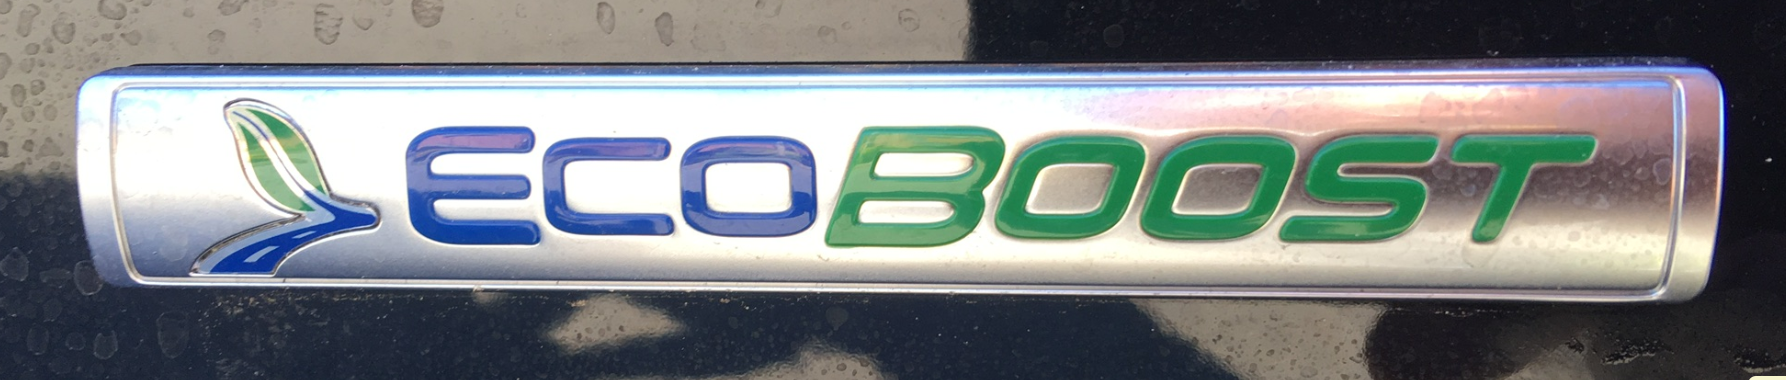 2018 EcoBoost Badge Removal on Tailgate - Ford F150 Forum